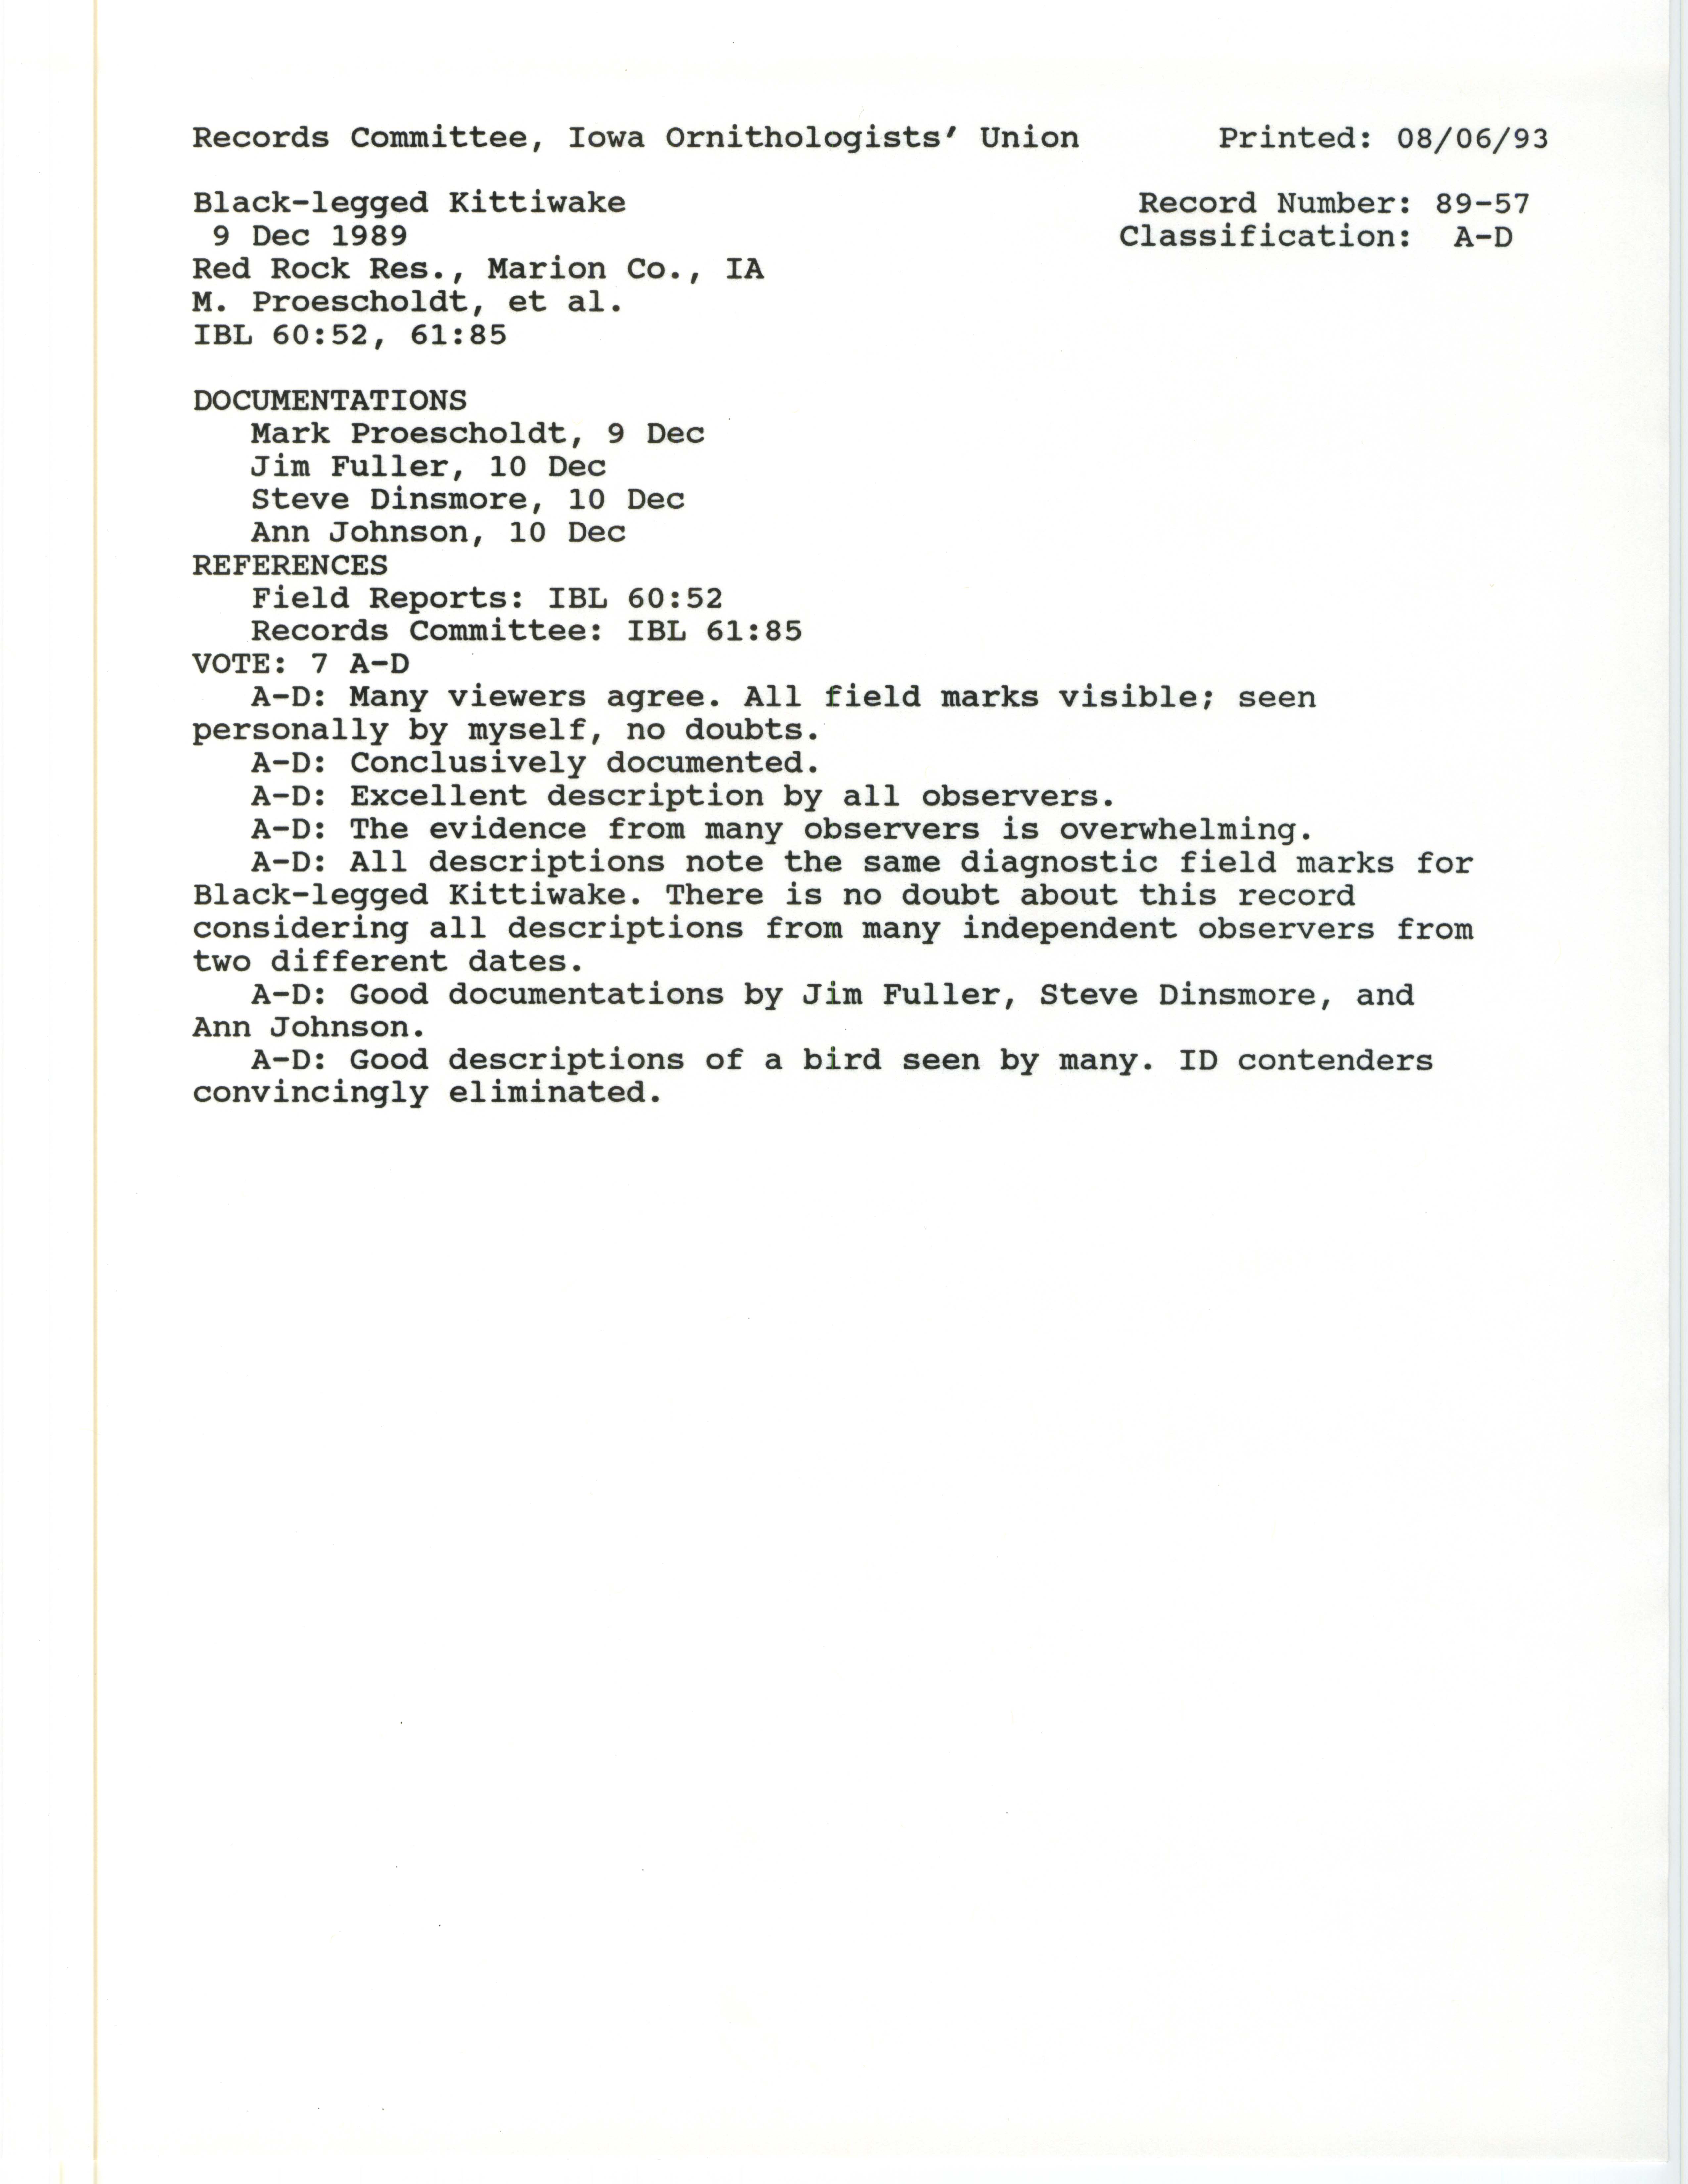 Records Committee review for rare bird sighting of Black-legged Kittiwake at Red Rock Dam, 1989